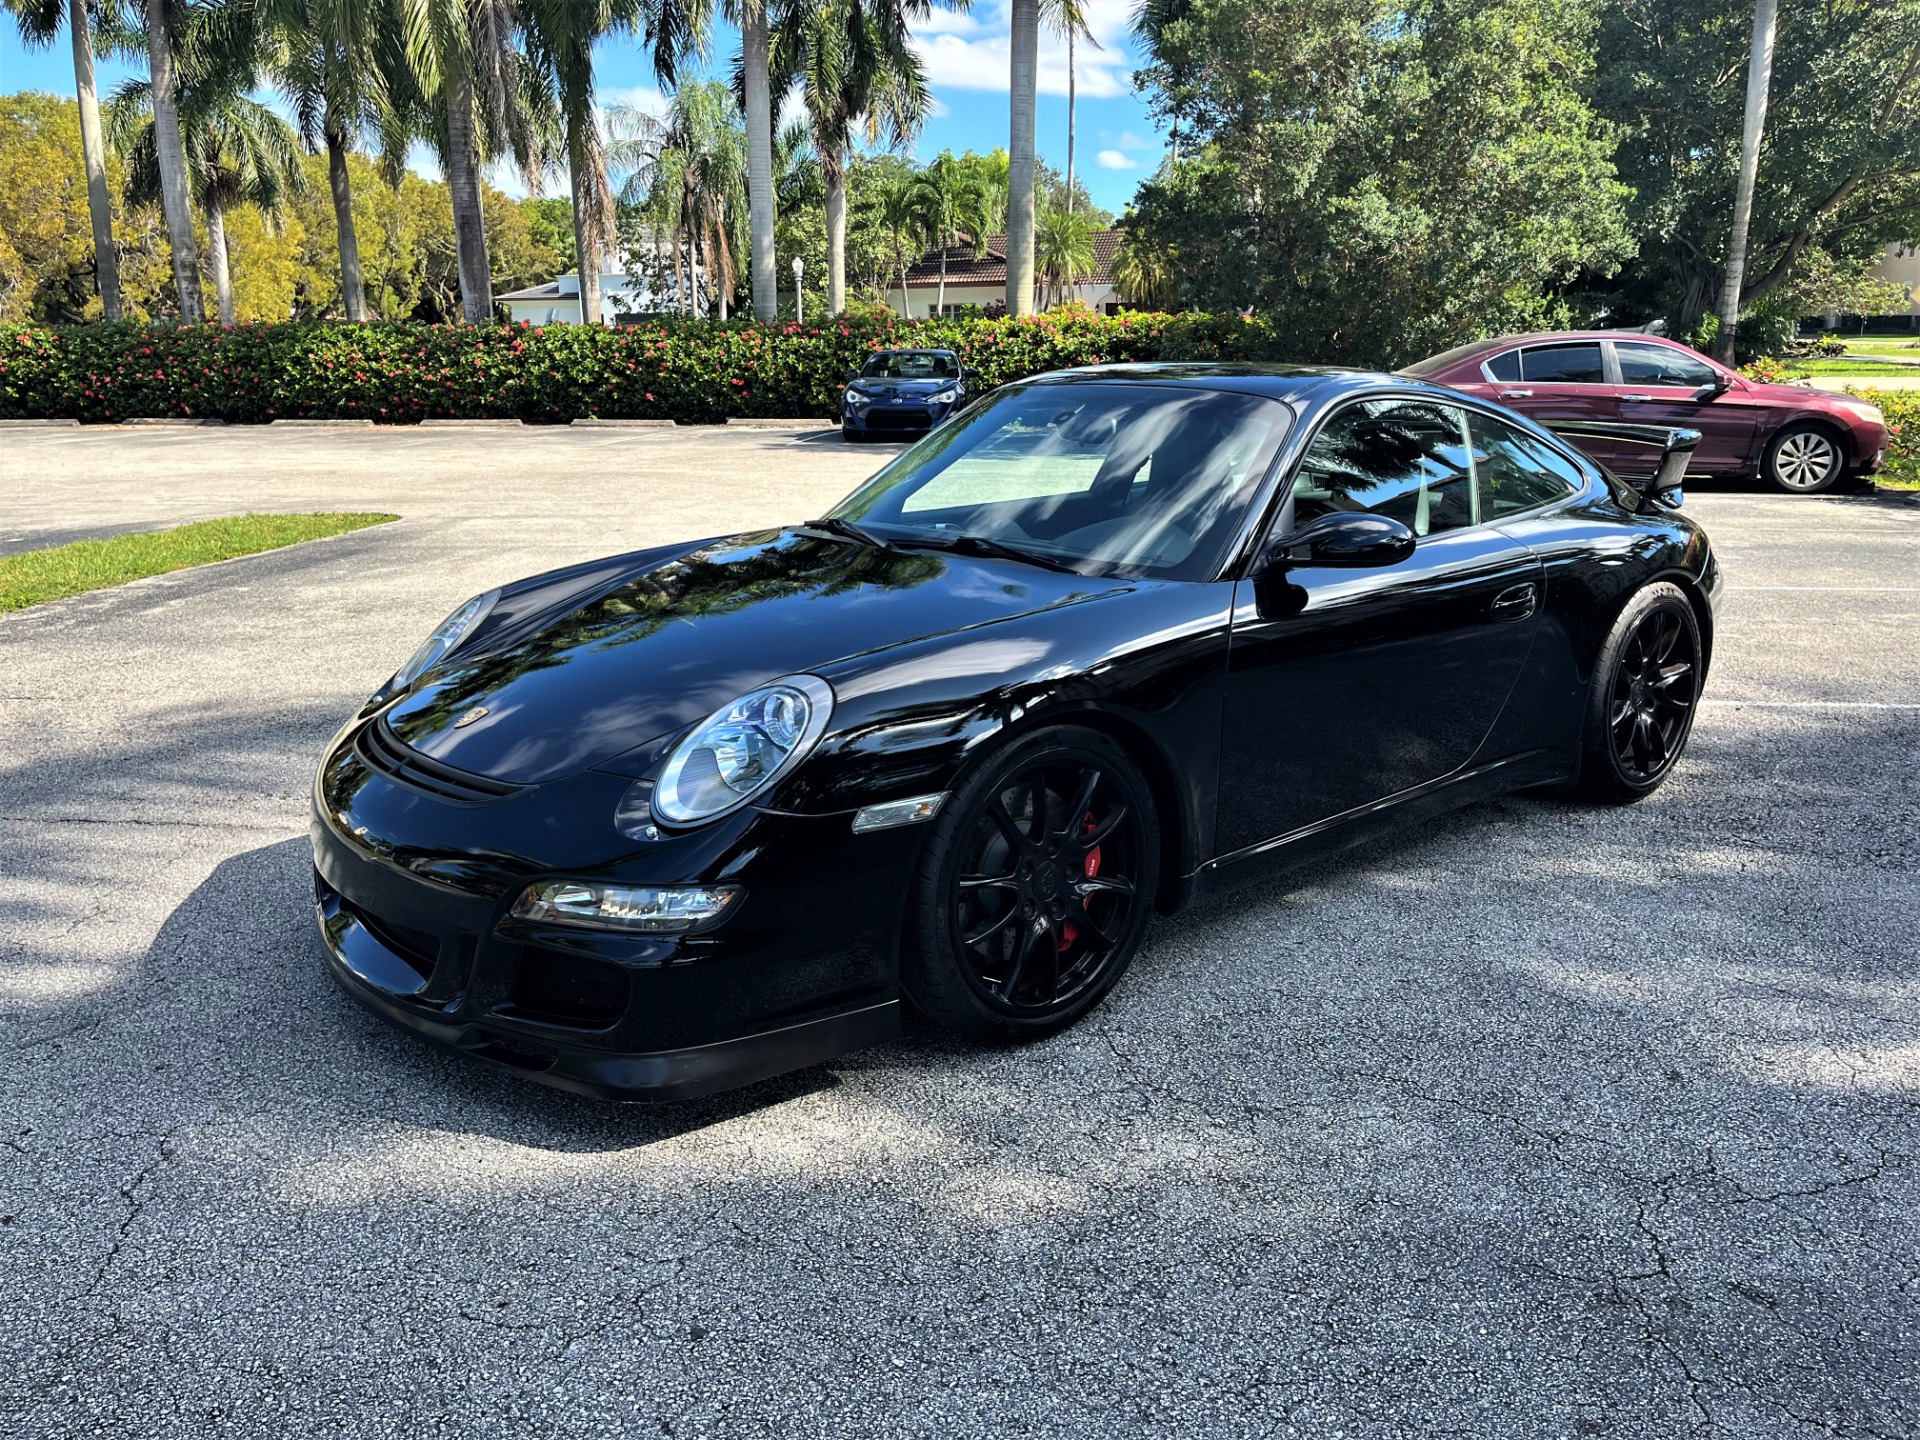 Used 2007 Porsche 911 GT3 for sale $139,850 at The Gables Sports Cars in Miami FL 33146 1